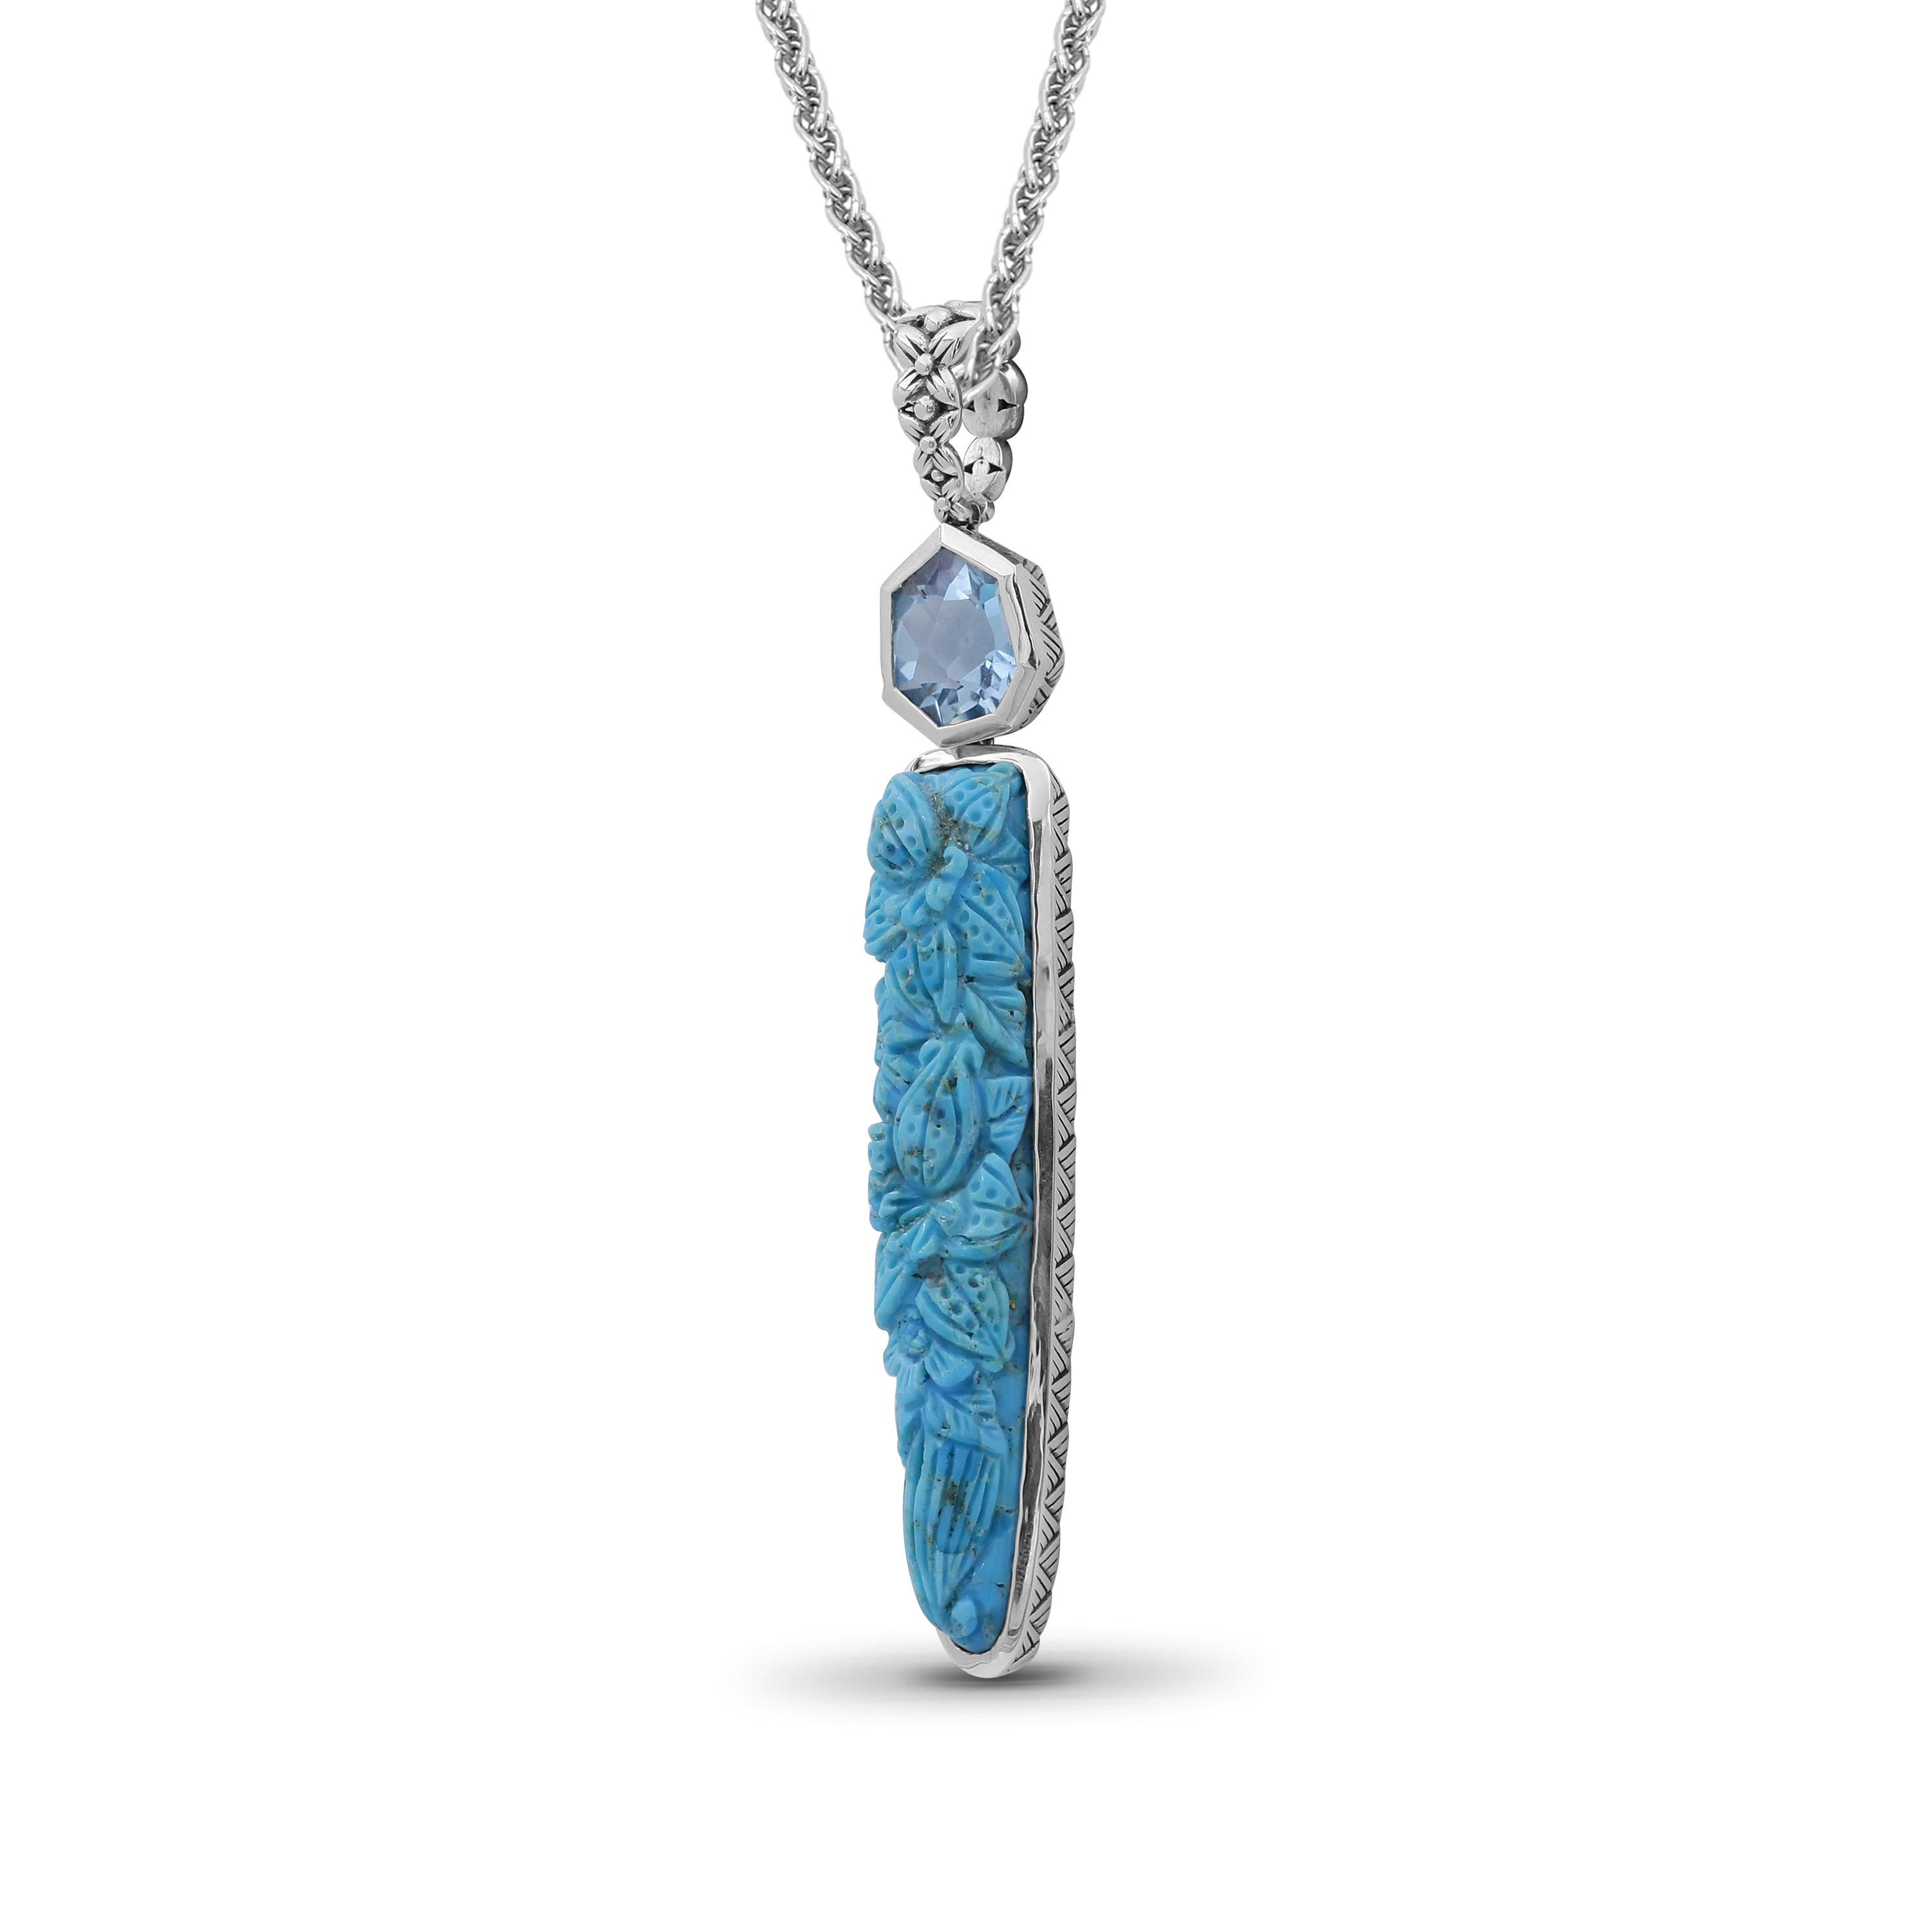 Indulge in the stunning beauty of Stephen Dweck's exquisite Hand Carved Turquoise and Faceted Galactical Blue Topaz Pendant, crafted with the utmost care and precision. This enchanting piece is a true celebration of the beauty of natural gemstones,